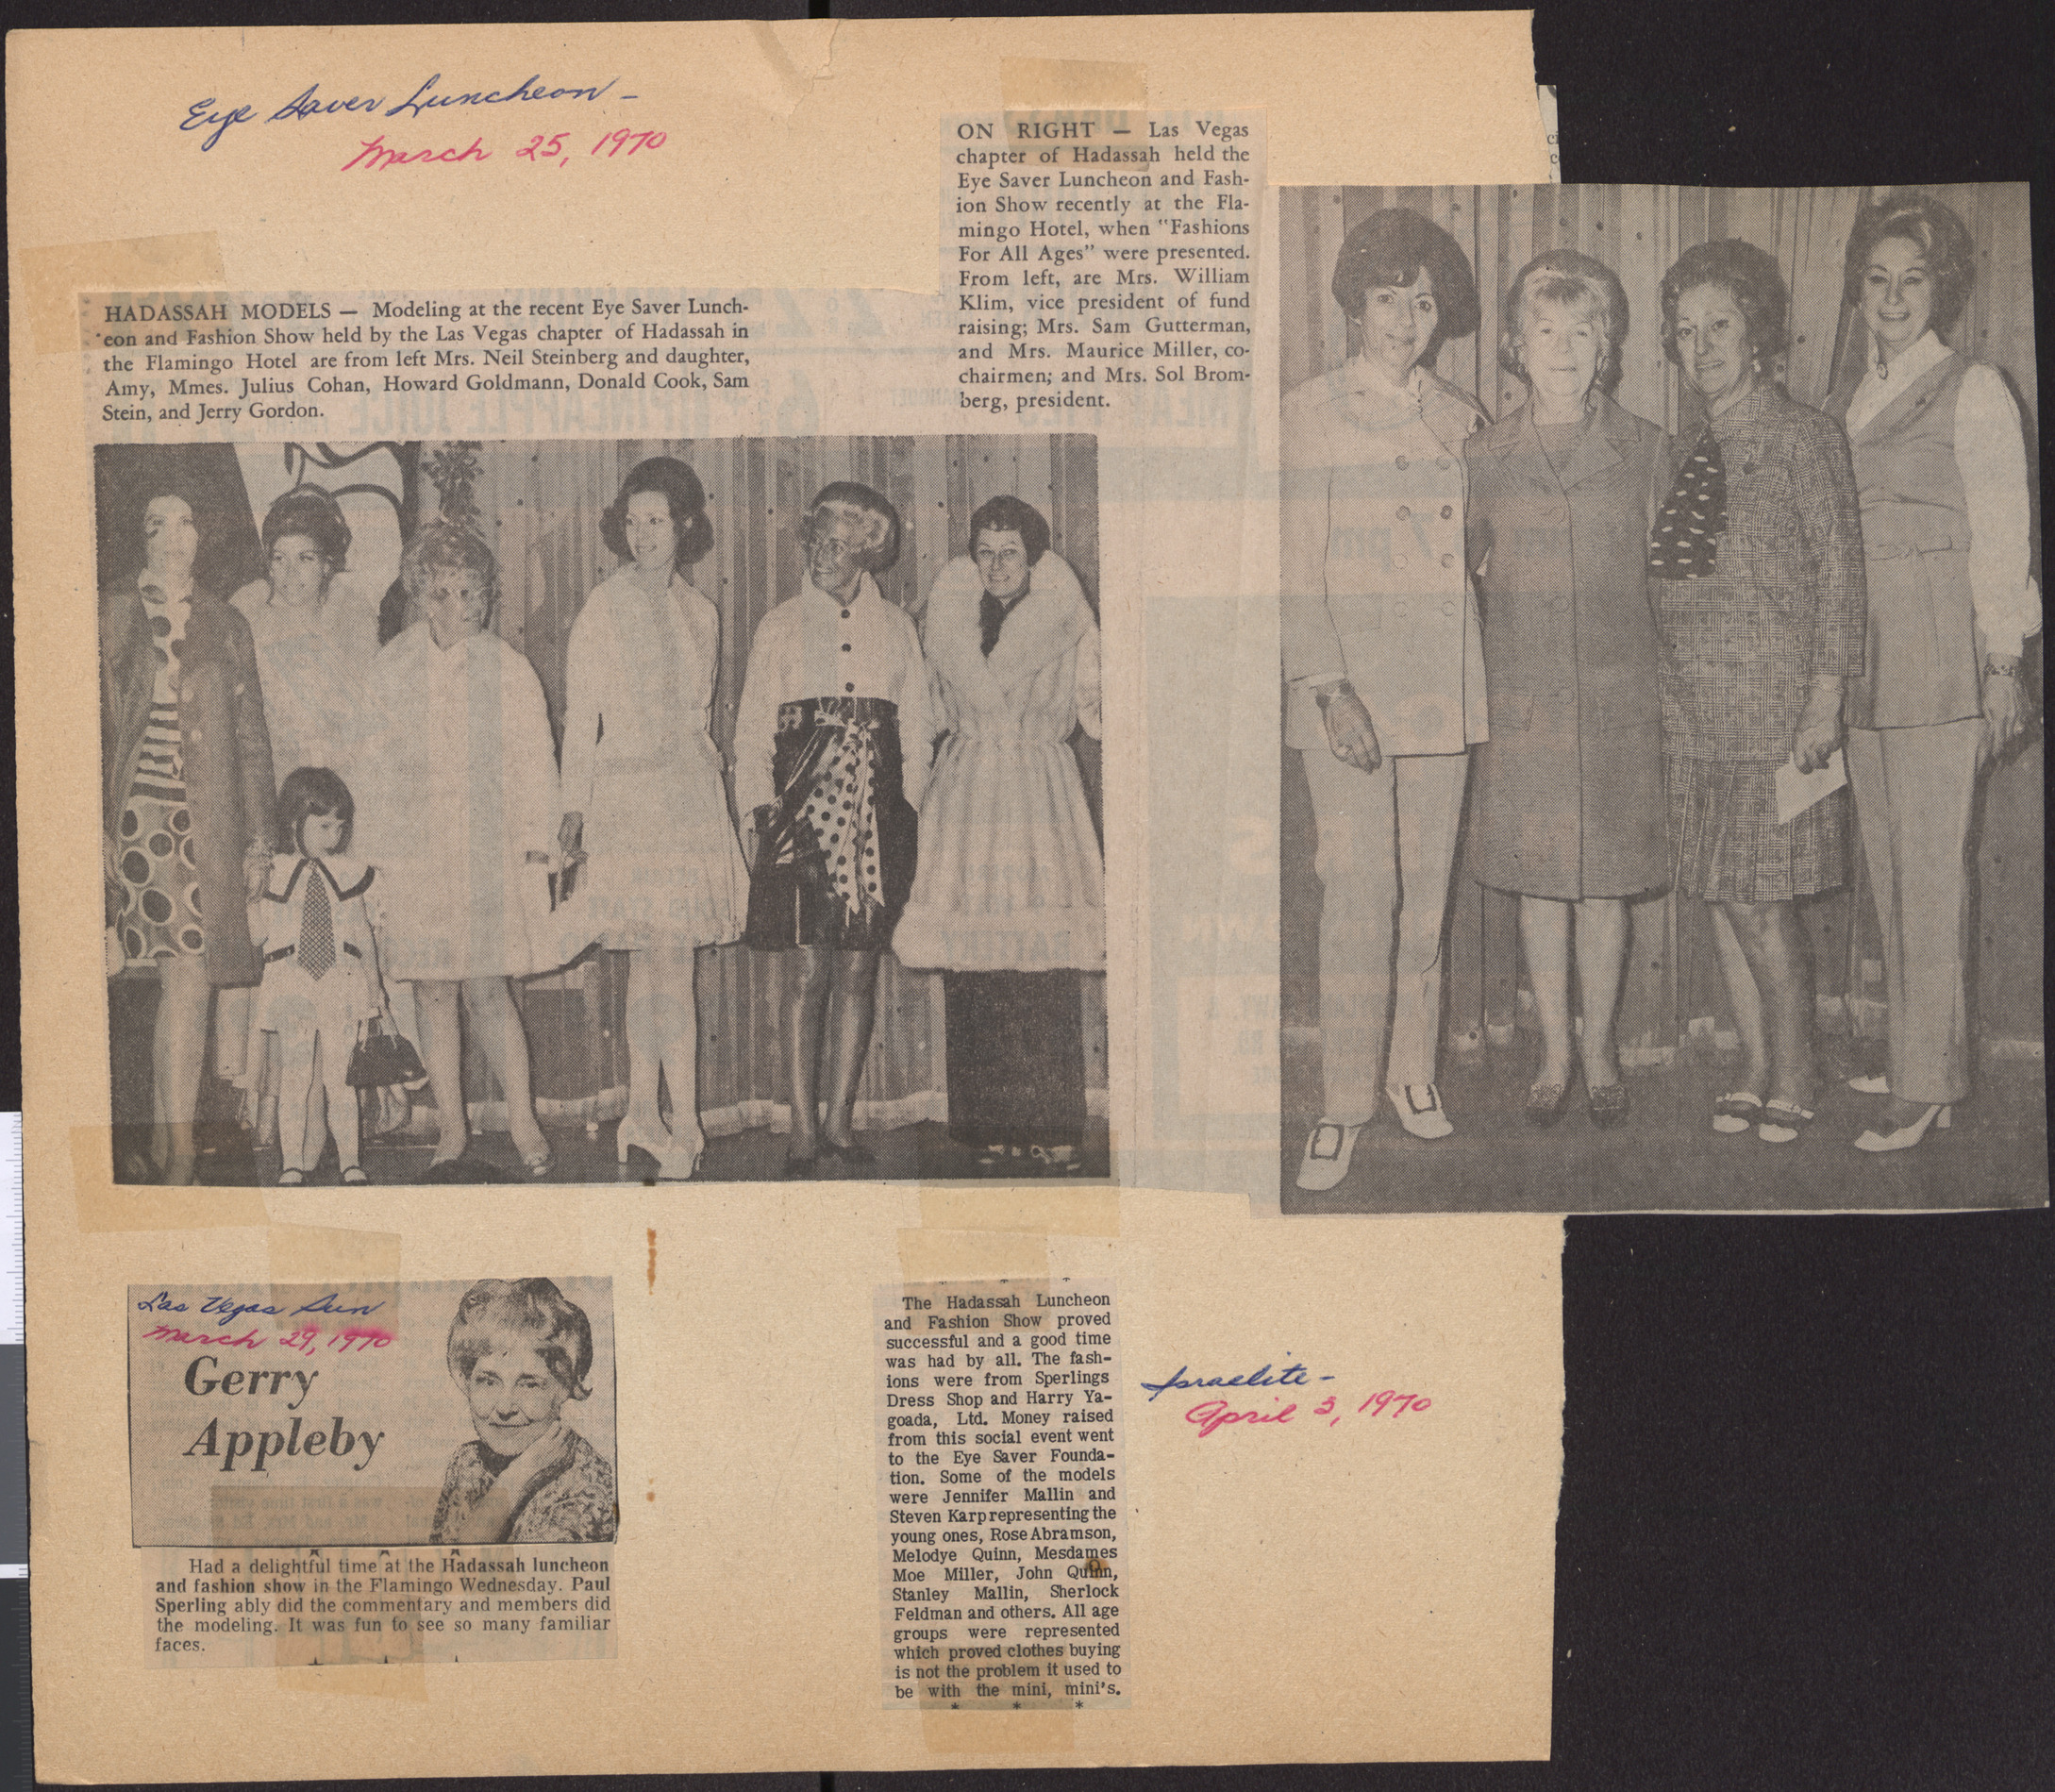 Newspaper clippings about Hadassah luncheon and fashion show, March 1970